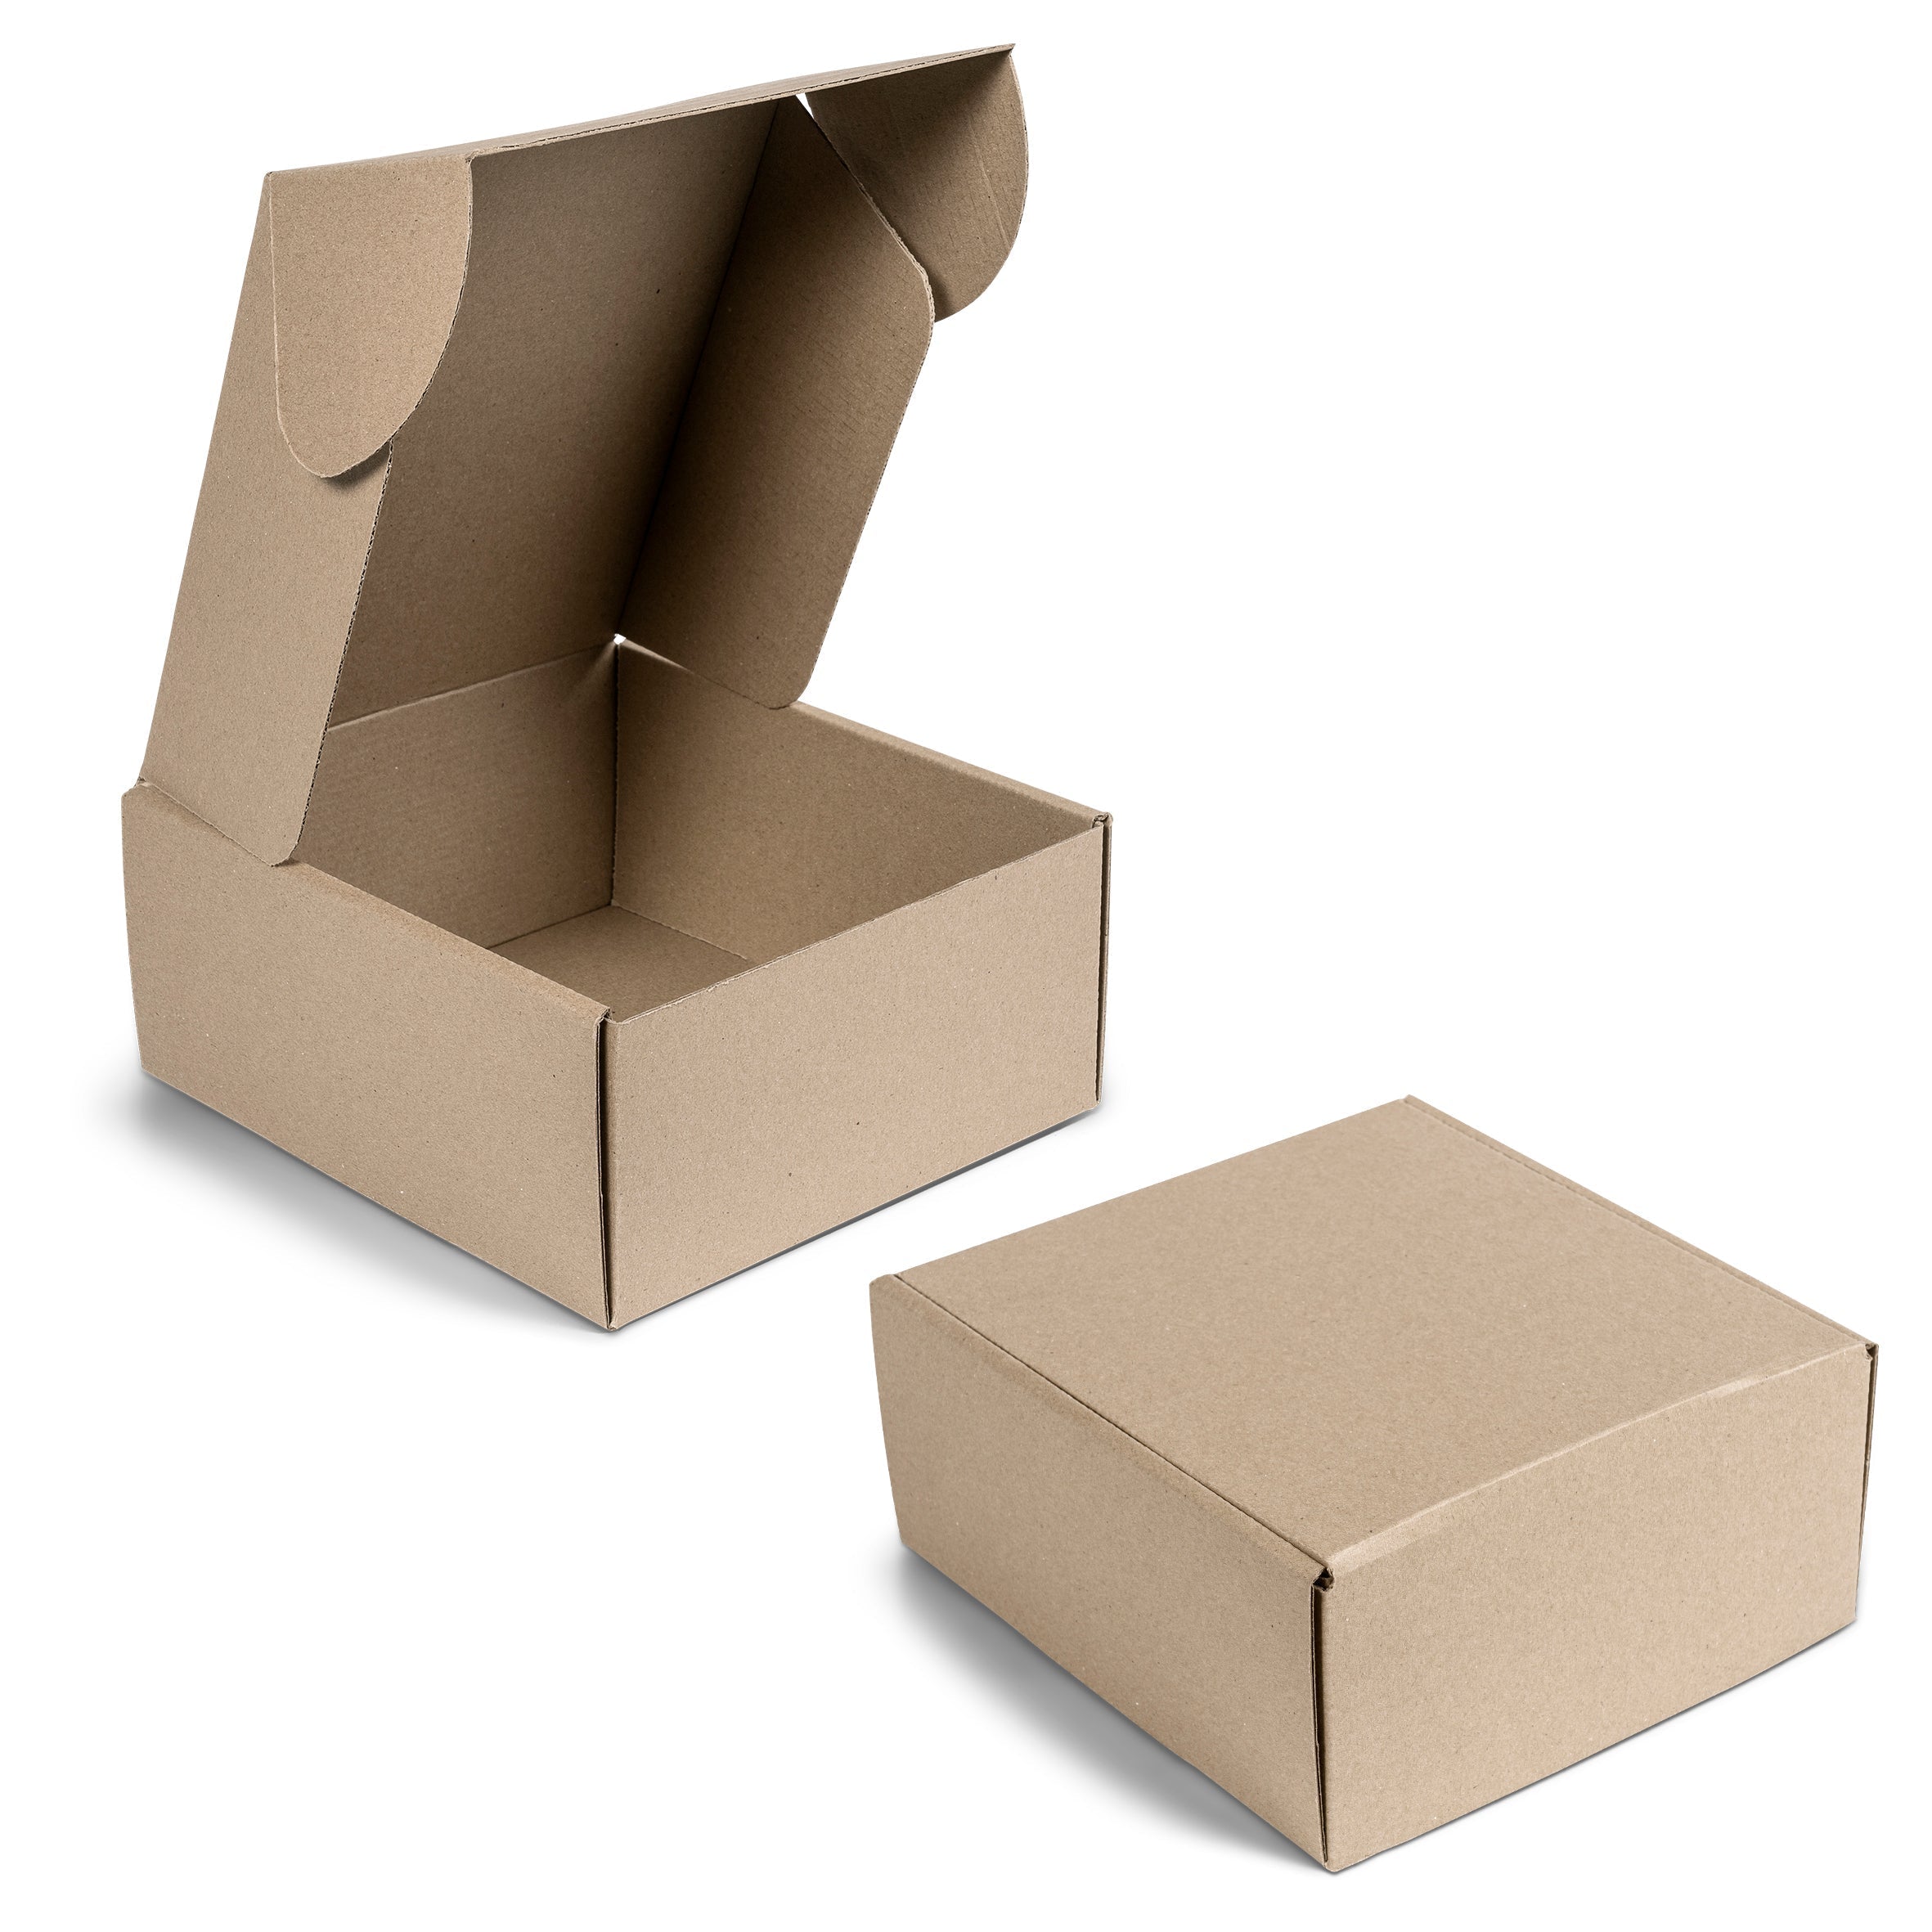 Unbranded corrugated cardboard gift boxes shown in closed and open open positions unbranded.